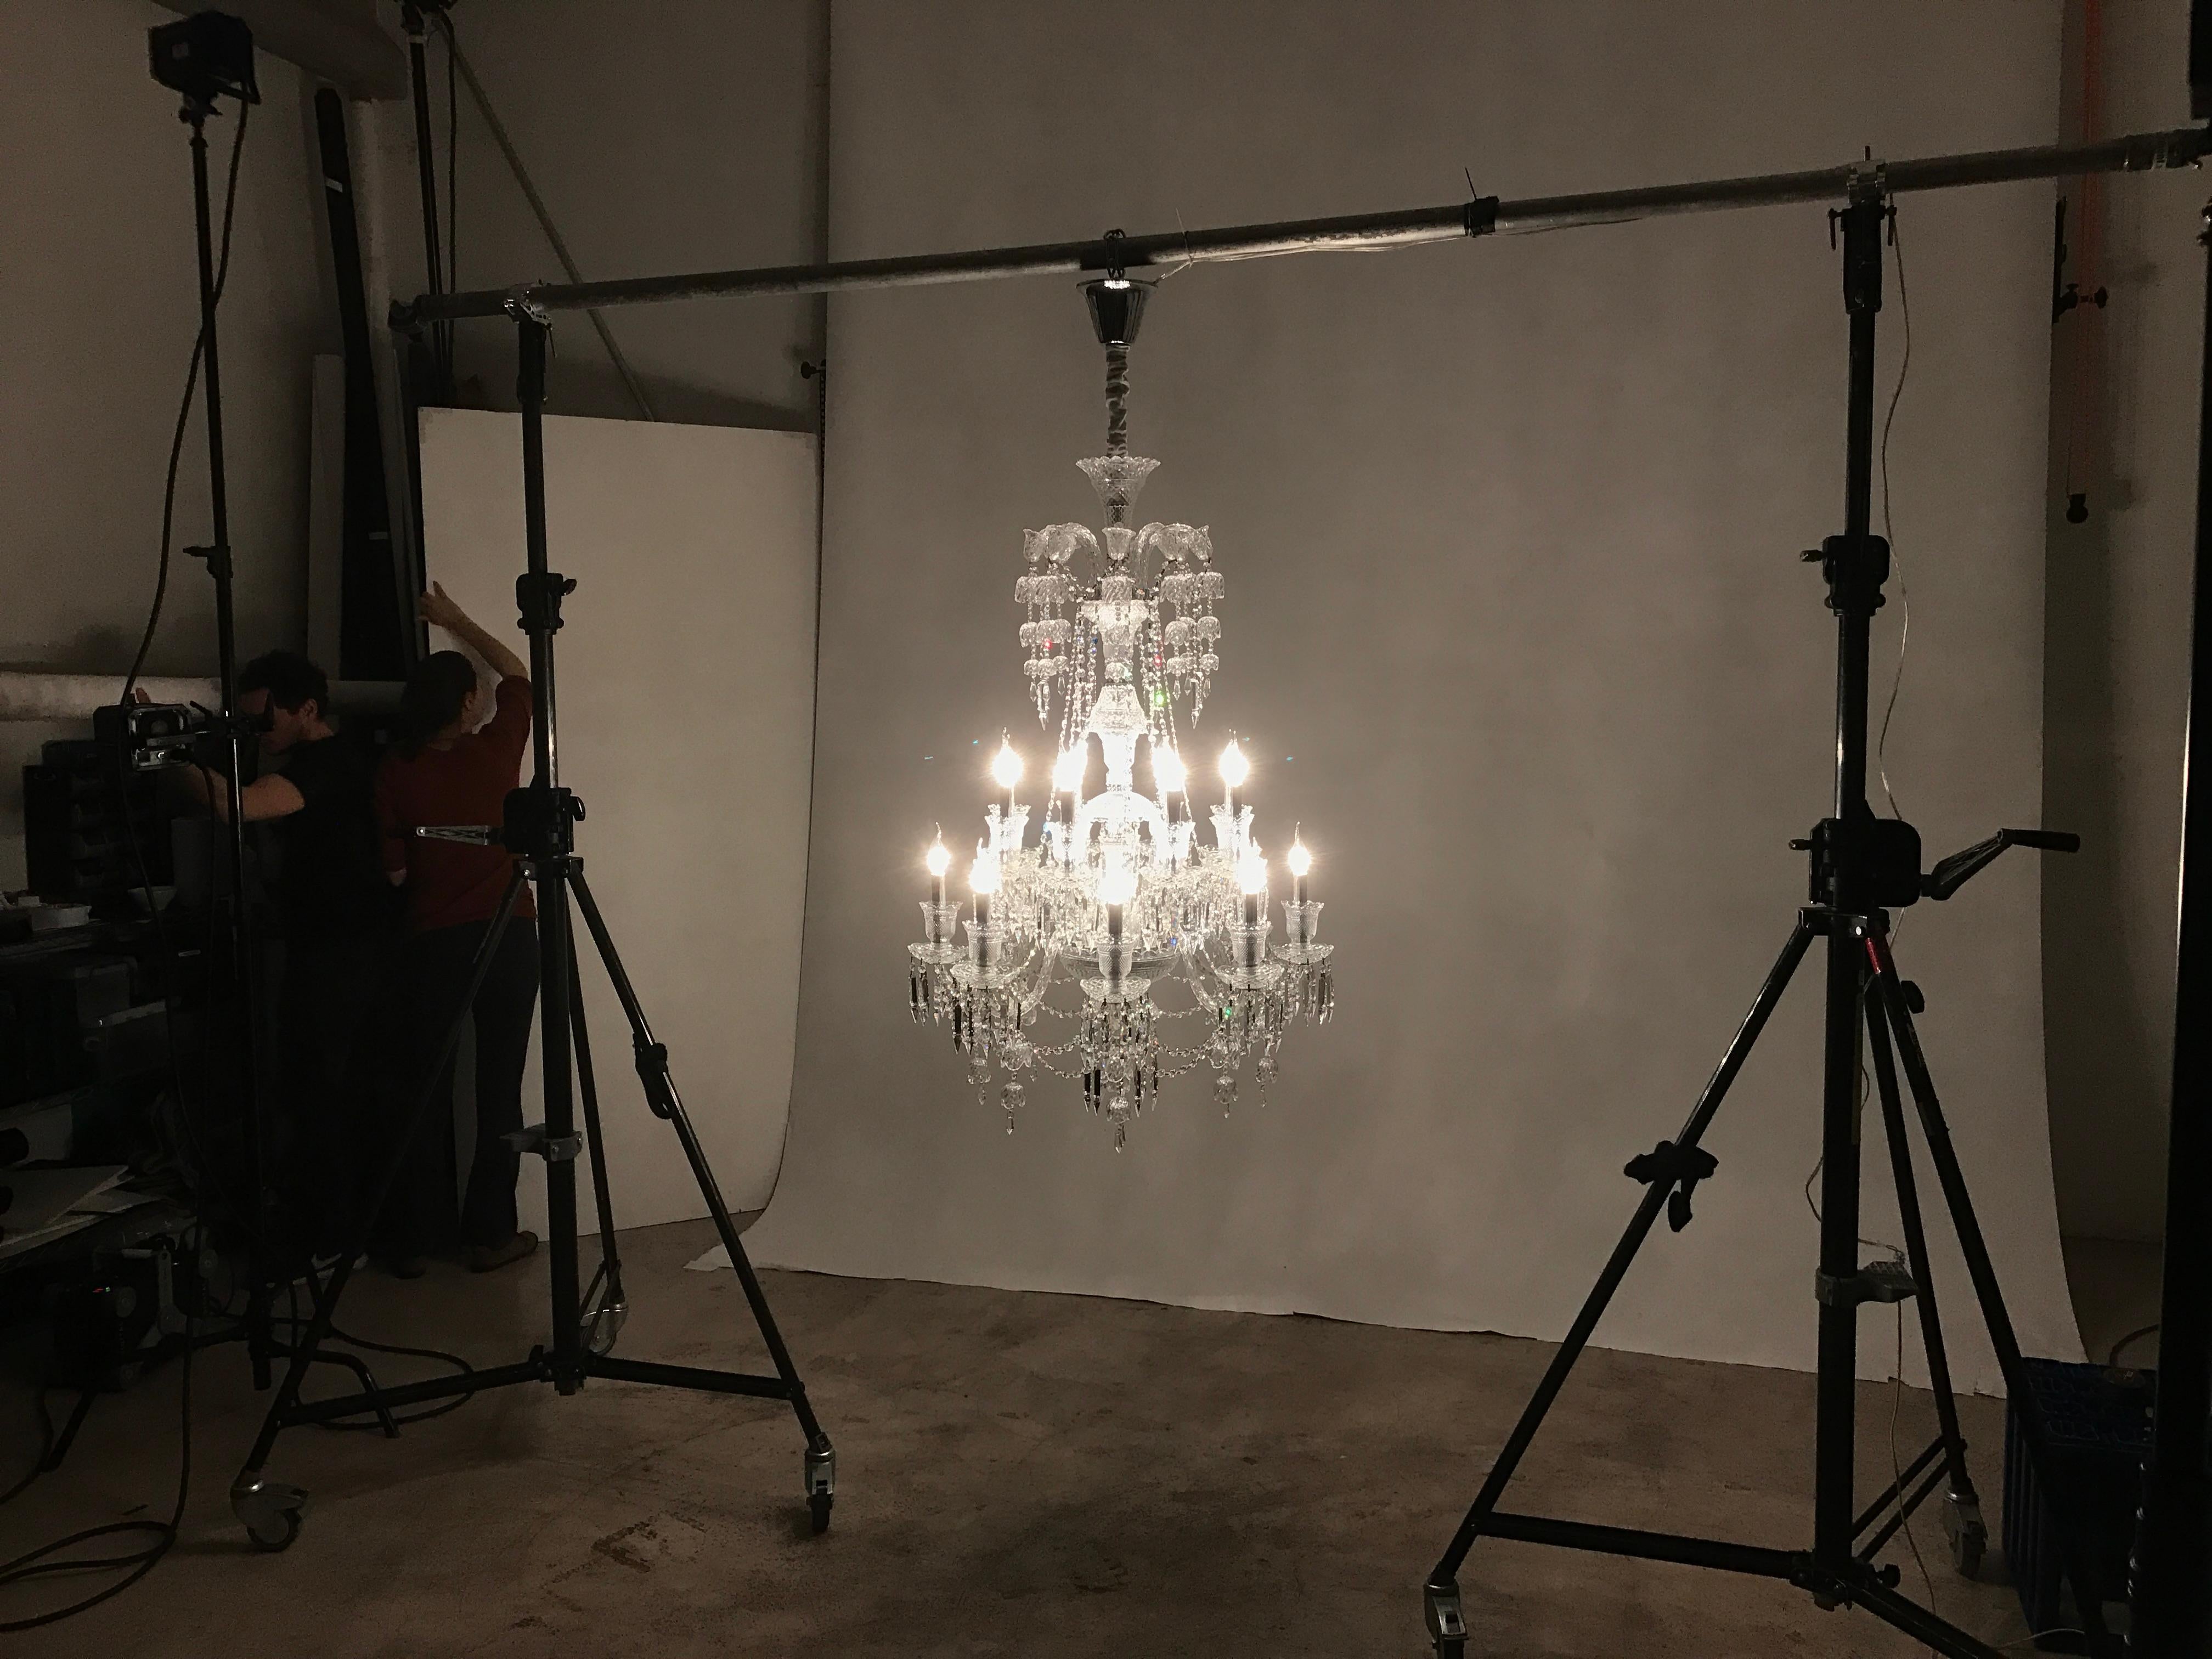 The Groenensteyn Hermitage Crystal is an exclusive model. The chandelier is beautifully decorated with Murano glass and is full of crystals. This lamp knows how to turn every space into a true palace! 

The chandelier is made from Murano glass